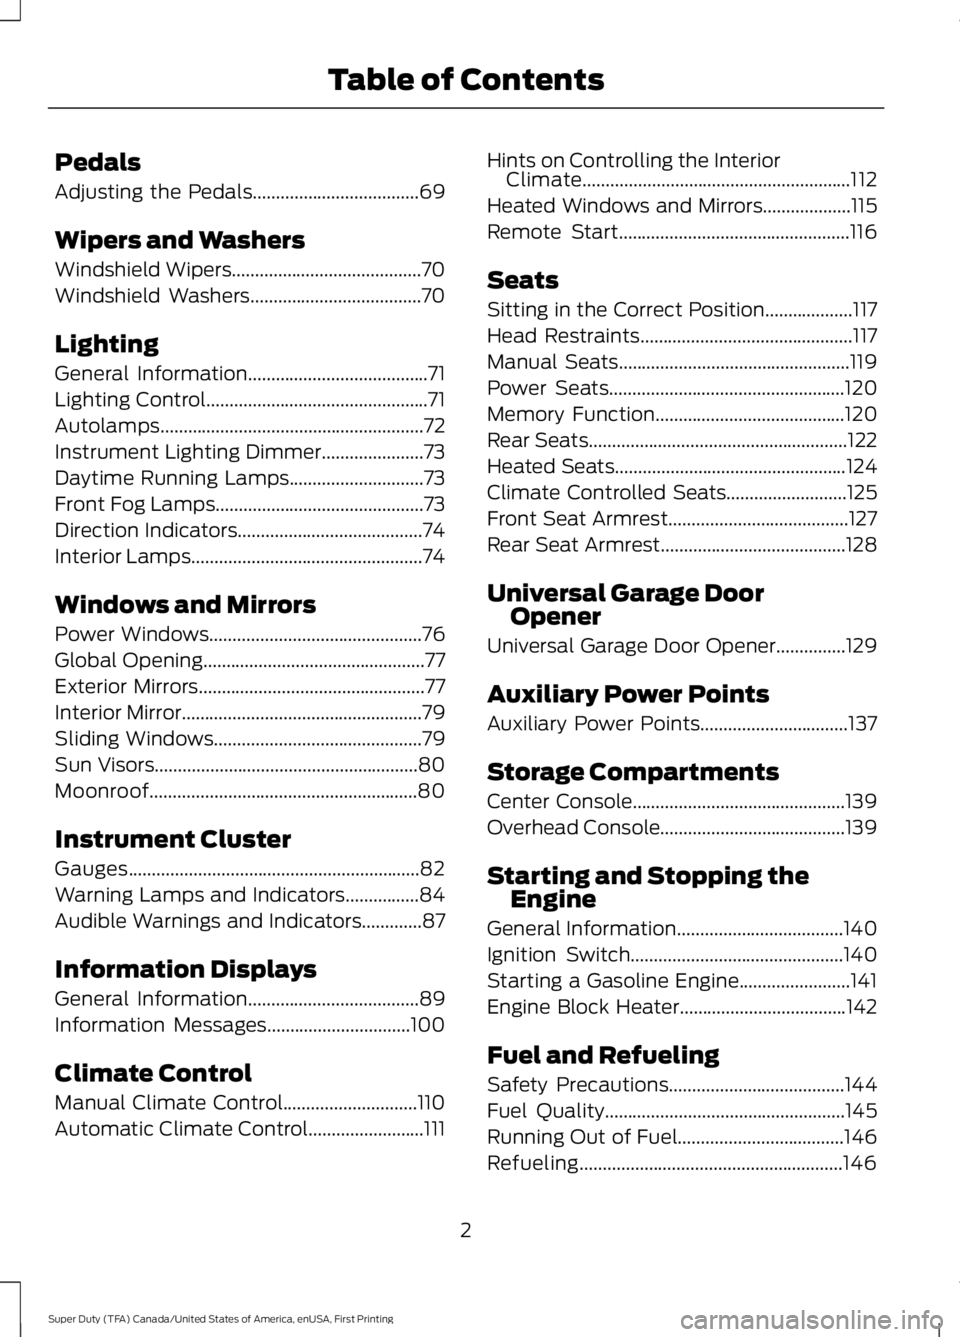 FORD F450 SUPER DUTY 2016  Owners Manual Pedals
Adjusting the Pedals....................................69
Wipers and Washers
Windshield Wipers.........................................70
Windshield Washers....................................